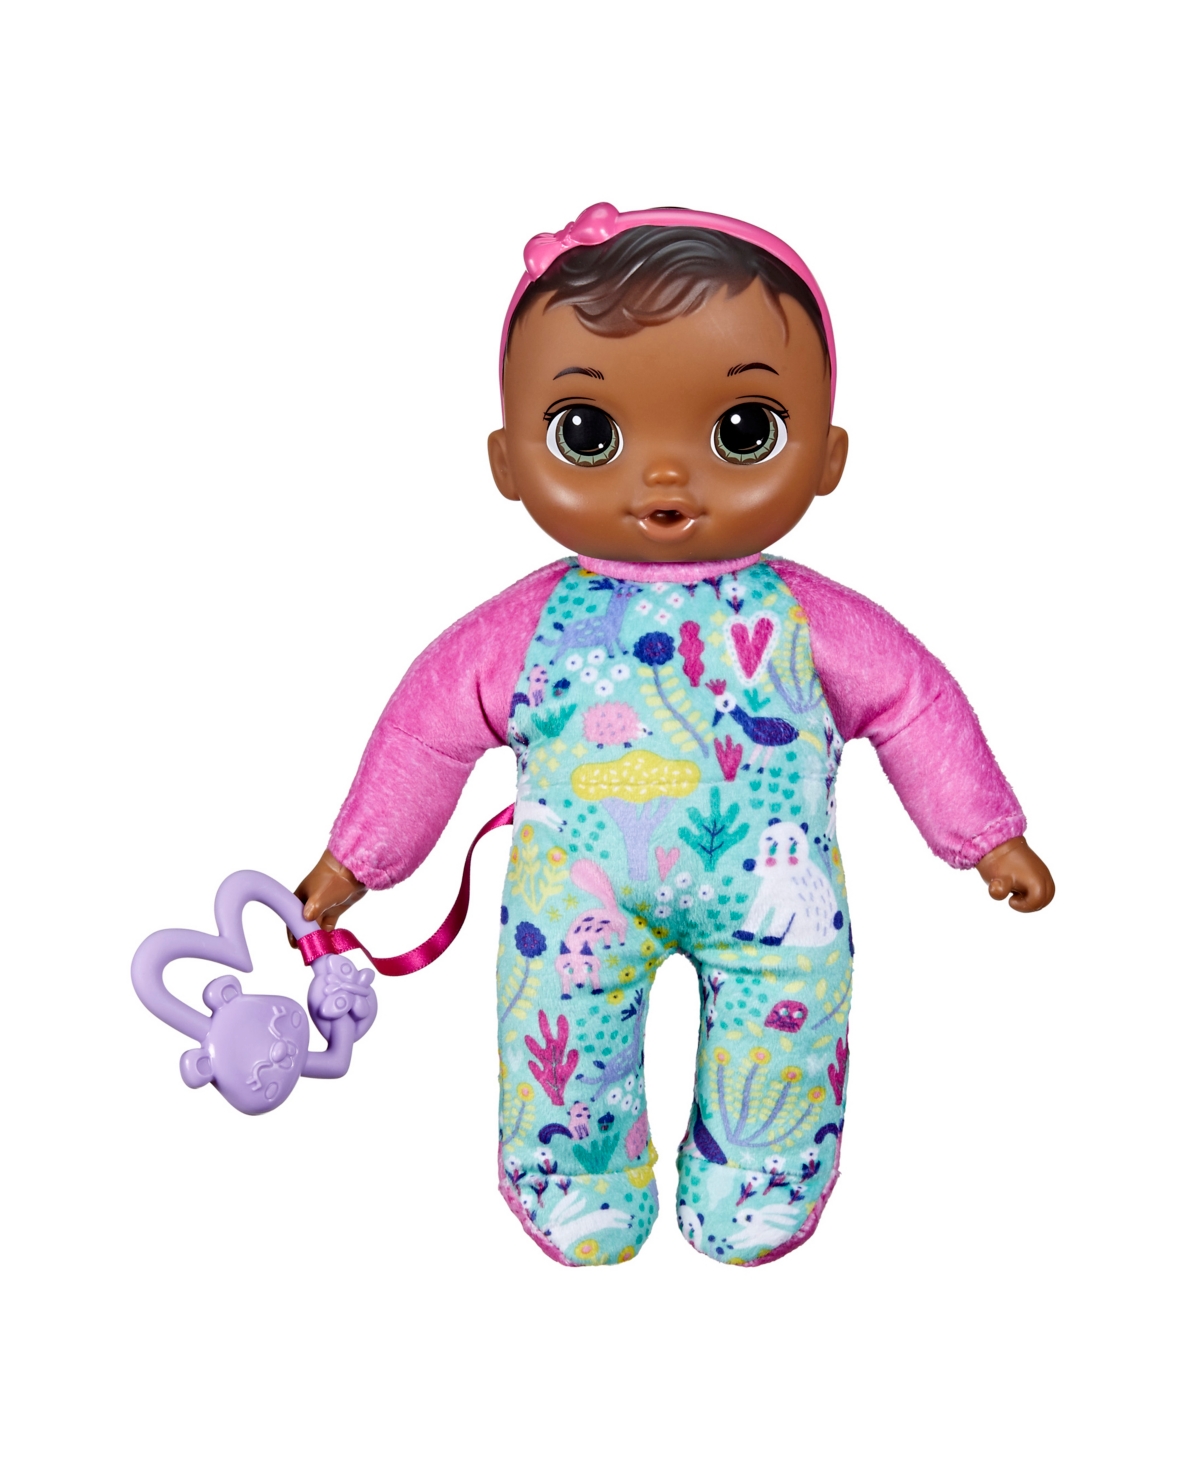 Baby Alive Kids' Soften Cute Doll, Brown Hair In No Color